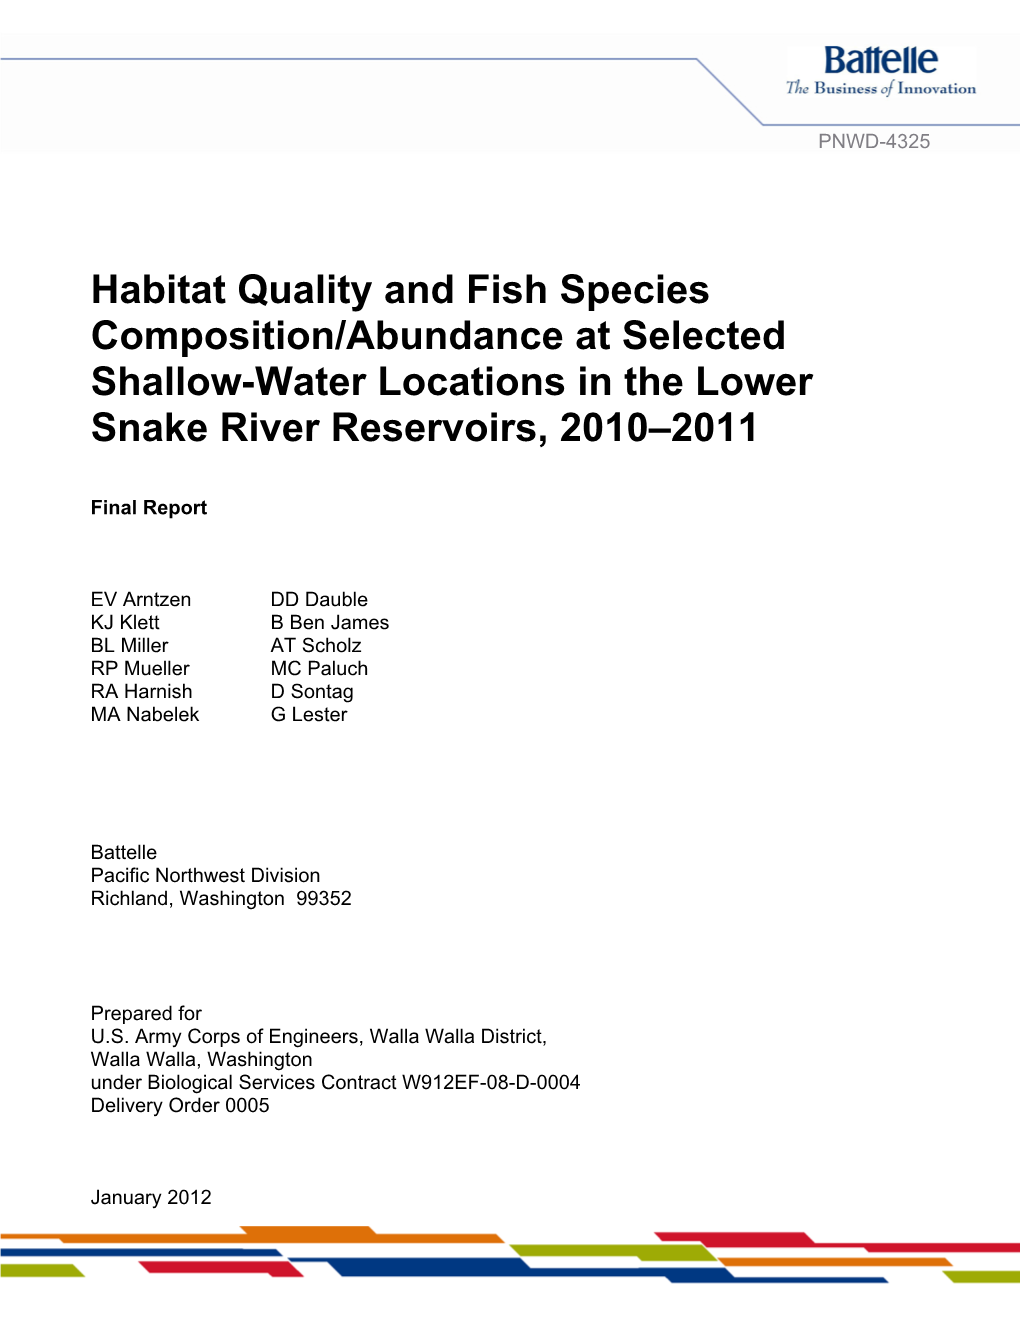 Habitat Quality and Fish Species Composition/Abundance at Selected Shallow-Water Locations in the Lower Snake River Reservoirs, 2010–2011